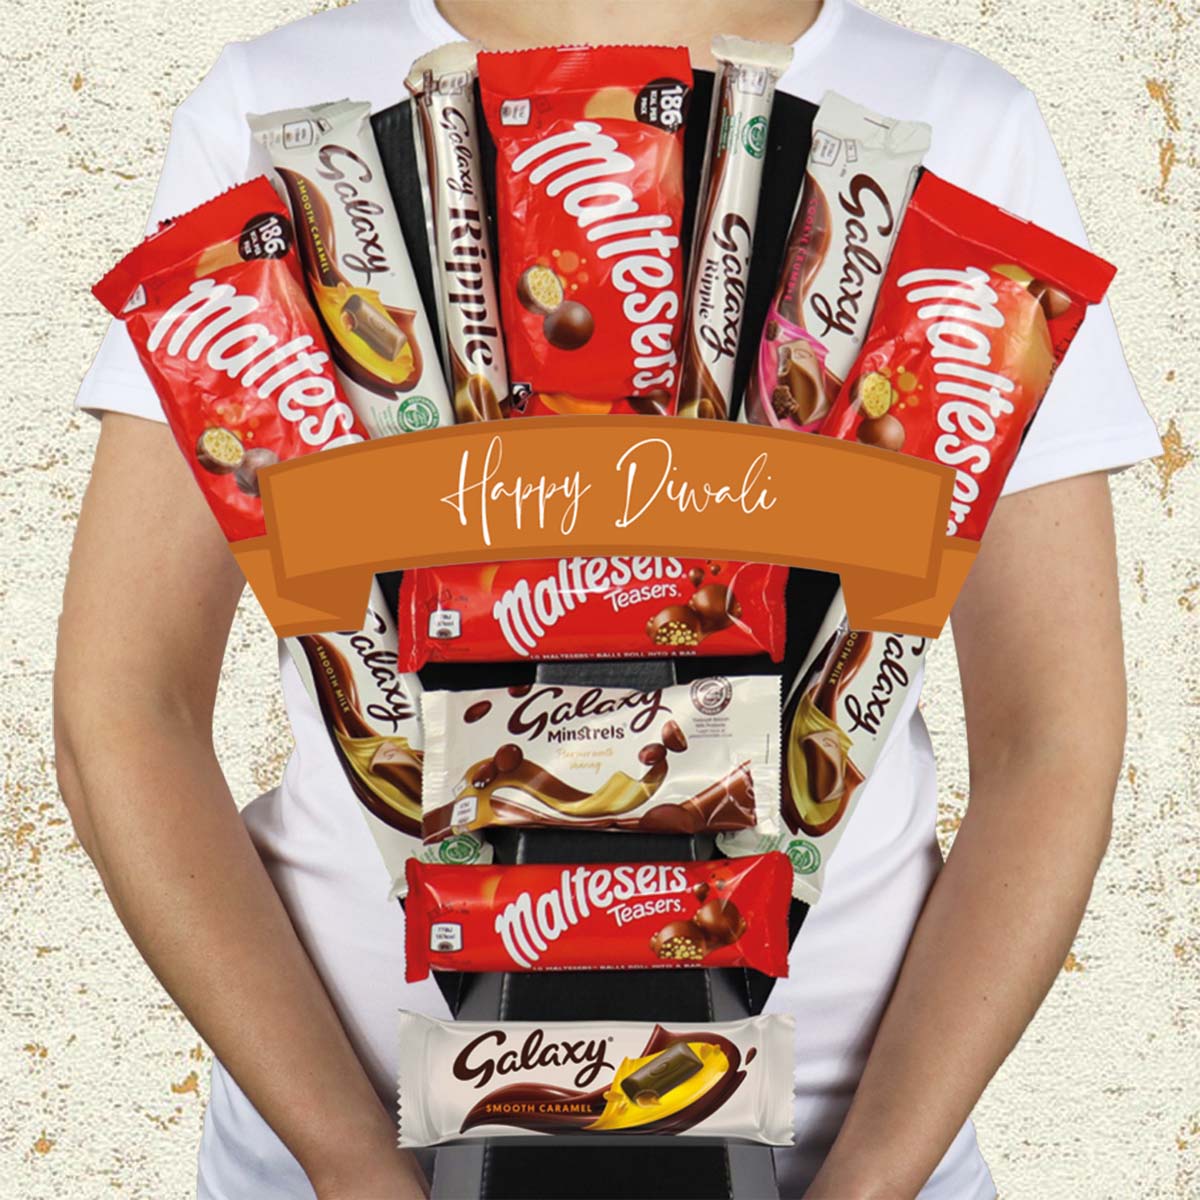 Large Malteser & Galaxy Happy Diwali Chocolate Bouquet - Perfect Way To Celebrate - Gift Hamper Box by HamperWell